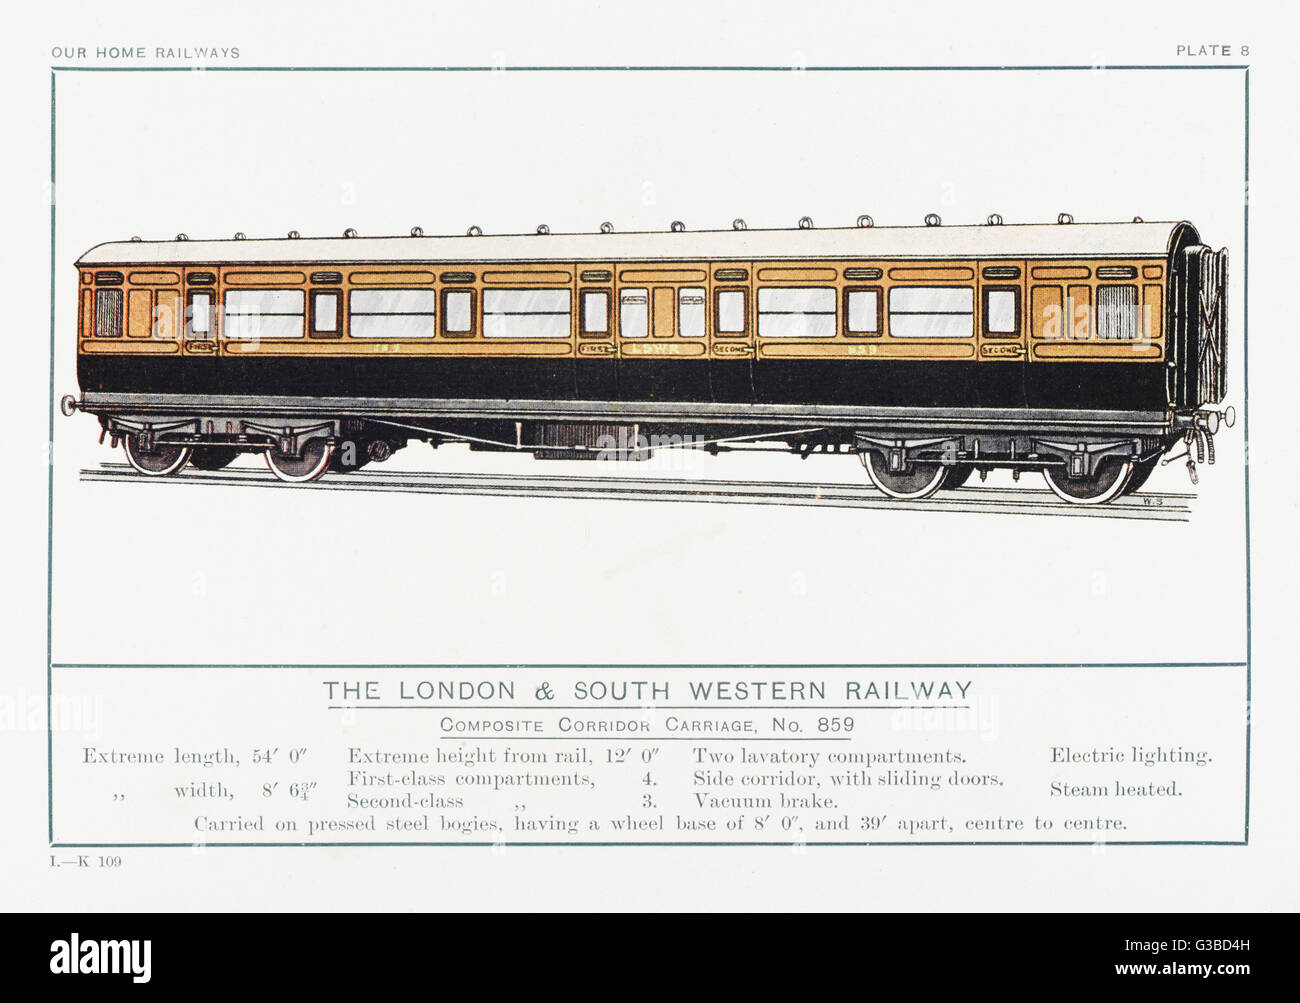 London and South Western Railway corridor carriage Stock Photo